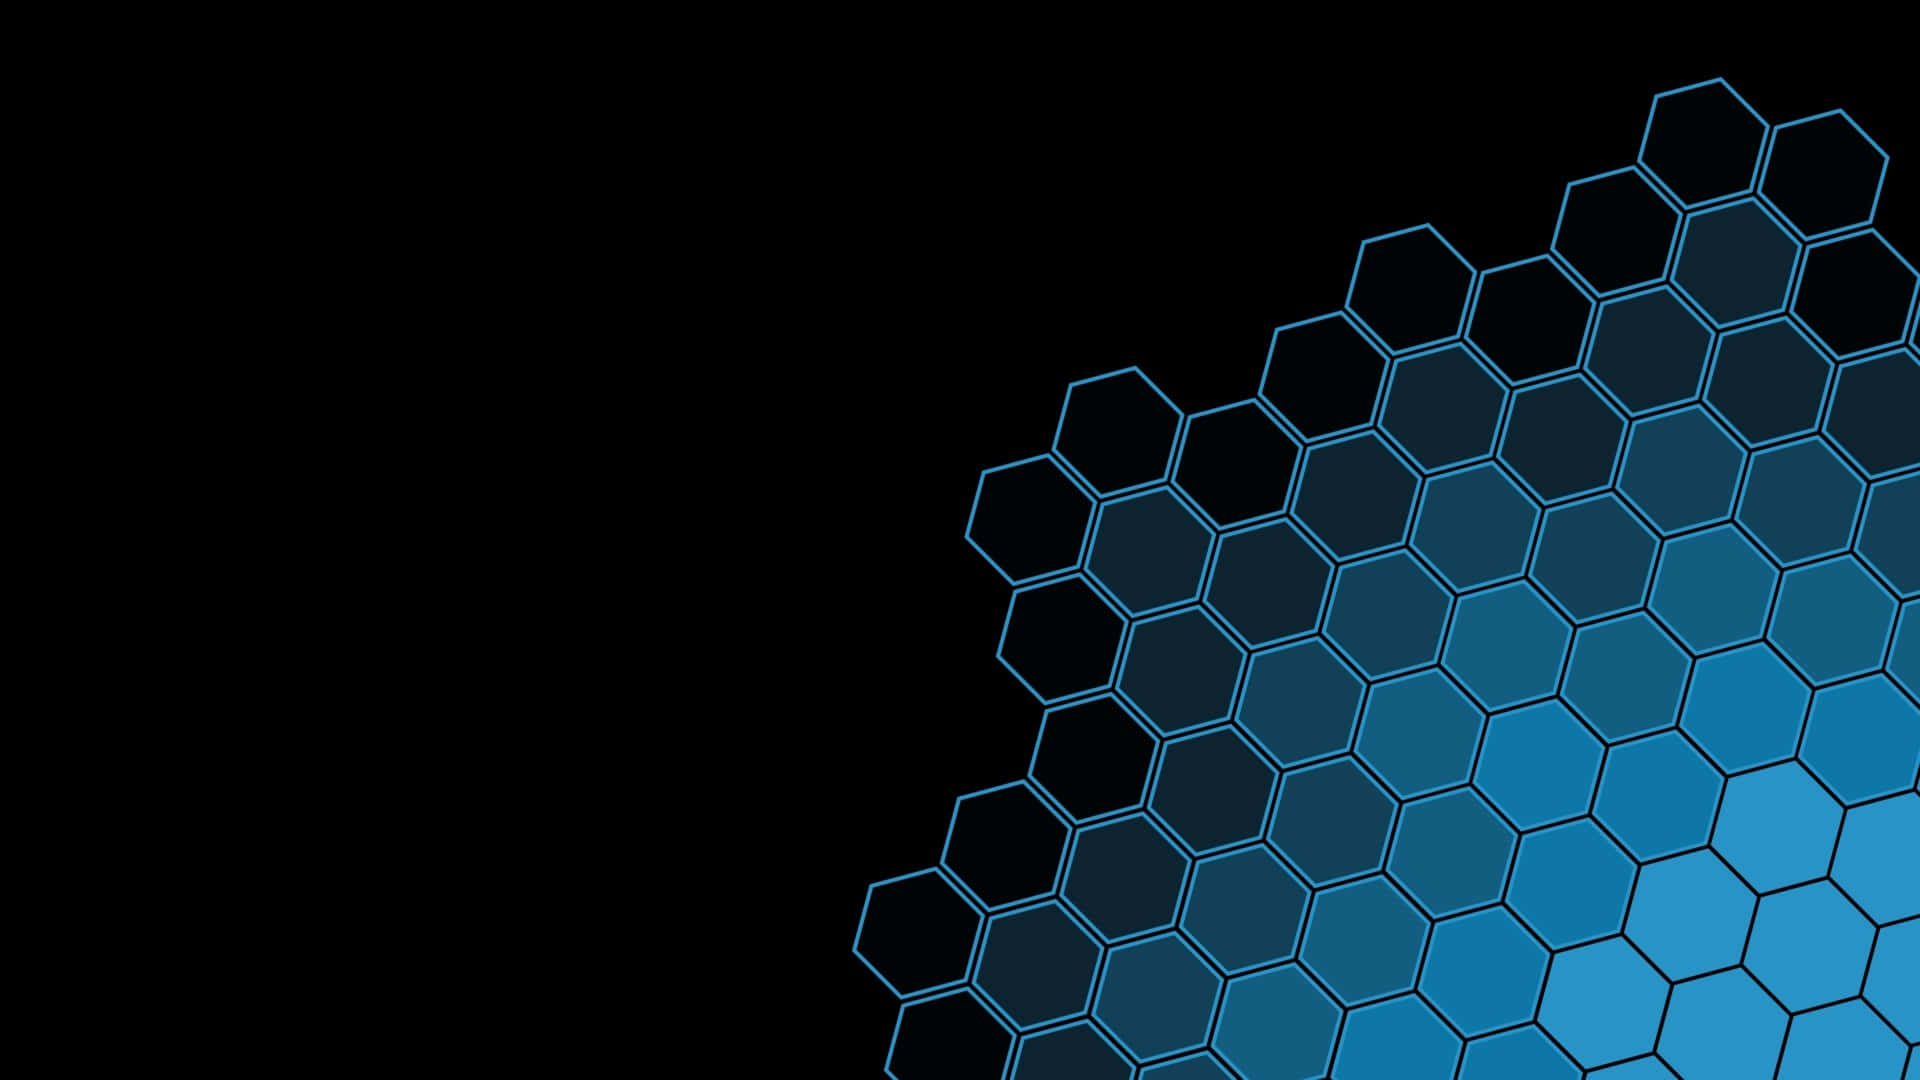 Intricately patterned hexagon wallpaper in blue and black Wallpaper